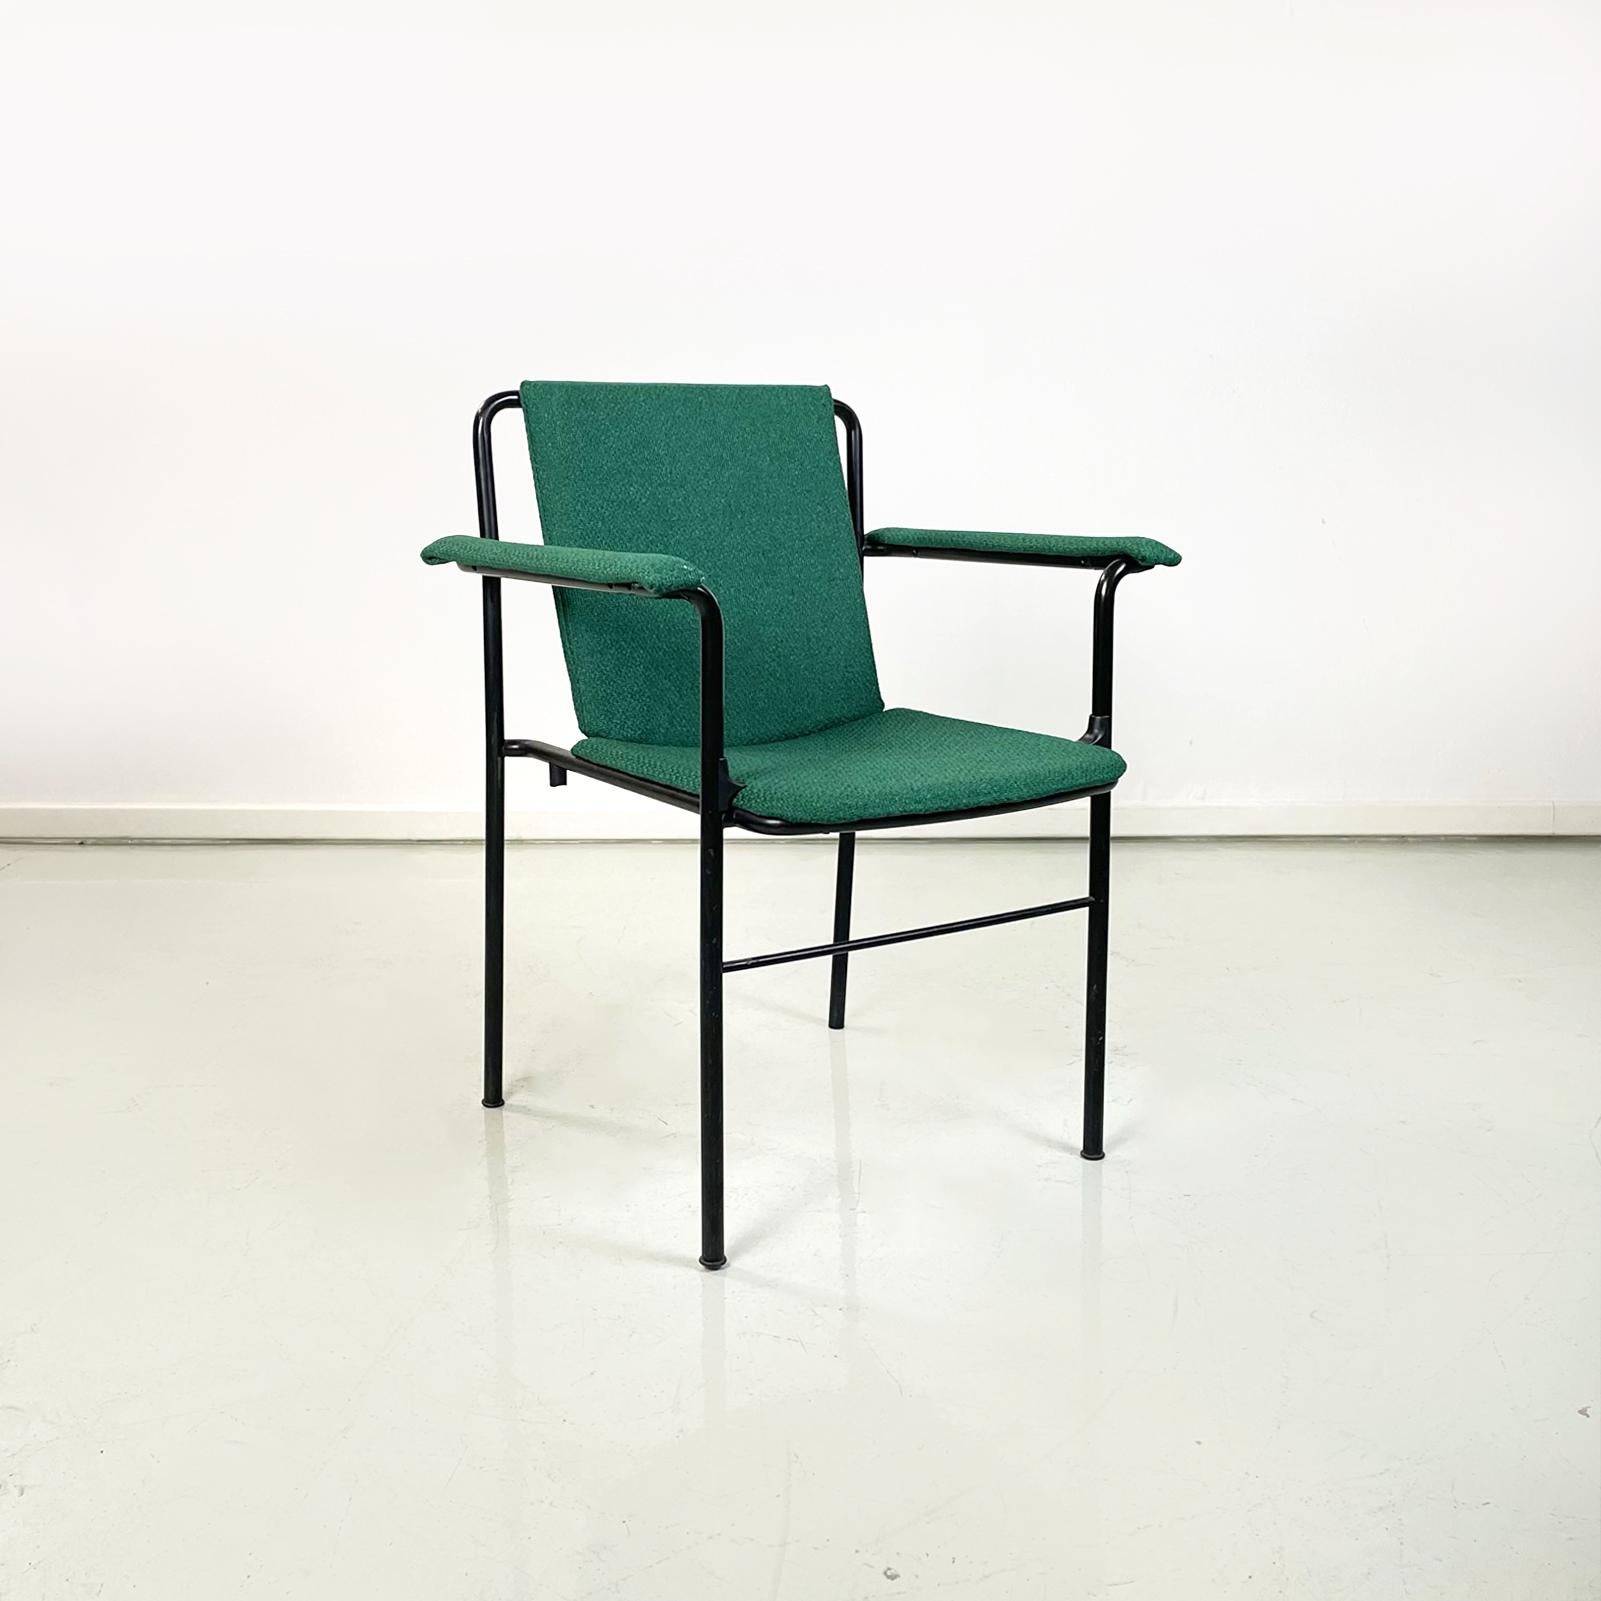 Italian modern armchairs movie chair by Mario Marenco for Poltrona Frau, 1980s
Set of 6 armchairs mod. Movie Chair with rectangular seat, armrests and backrest, upholstered in forest green fabric. The backrest is slightly inclined to follow the